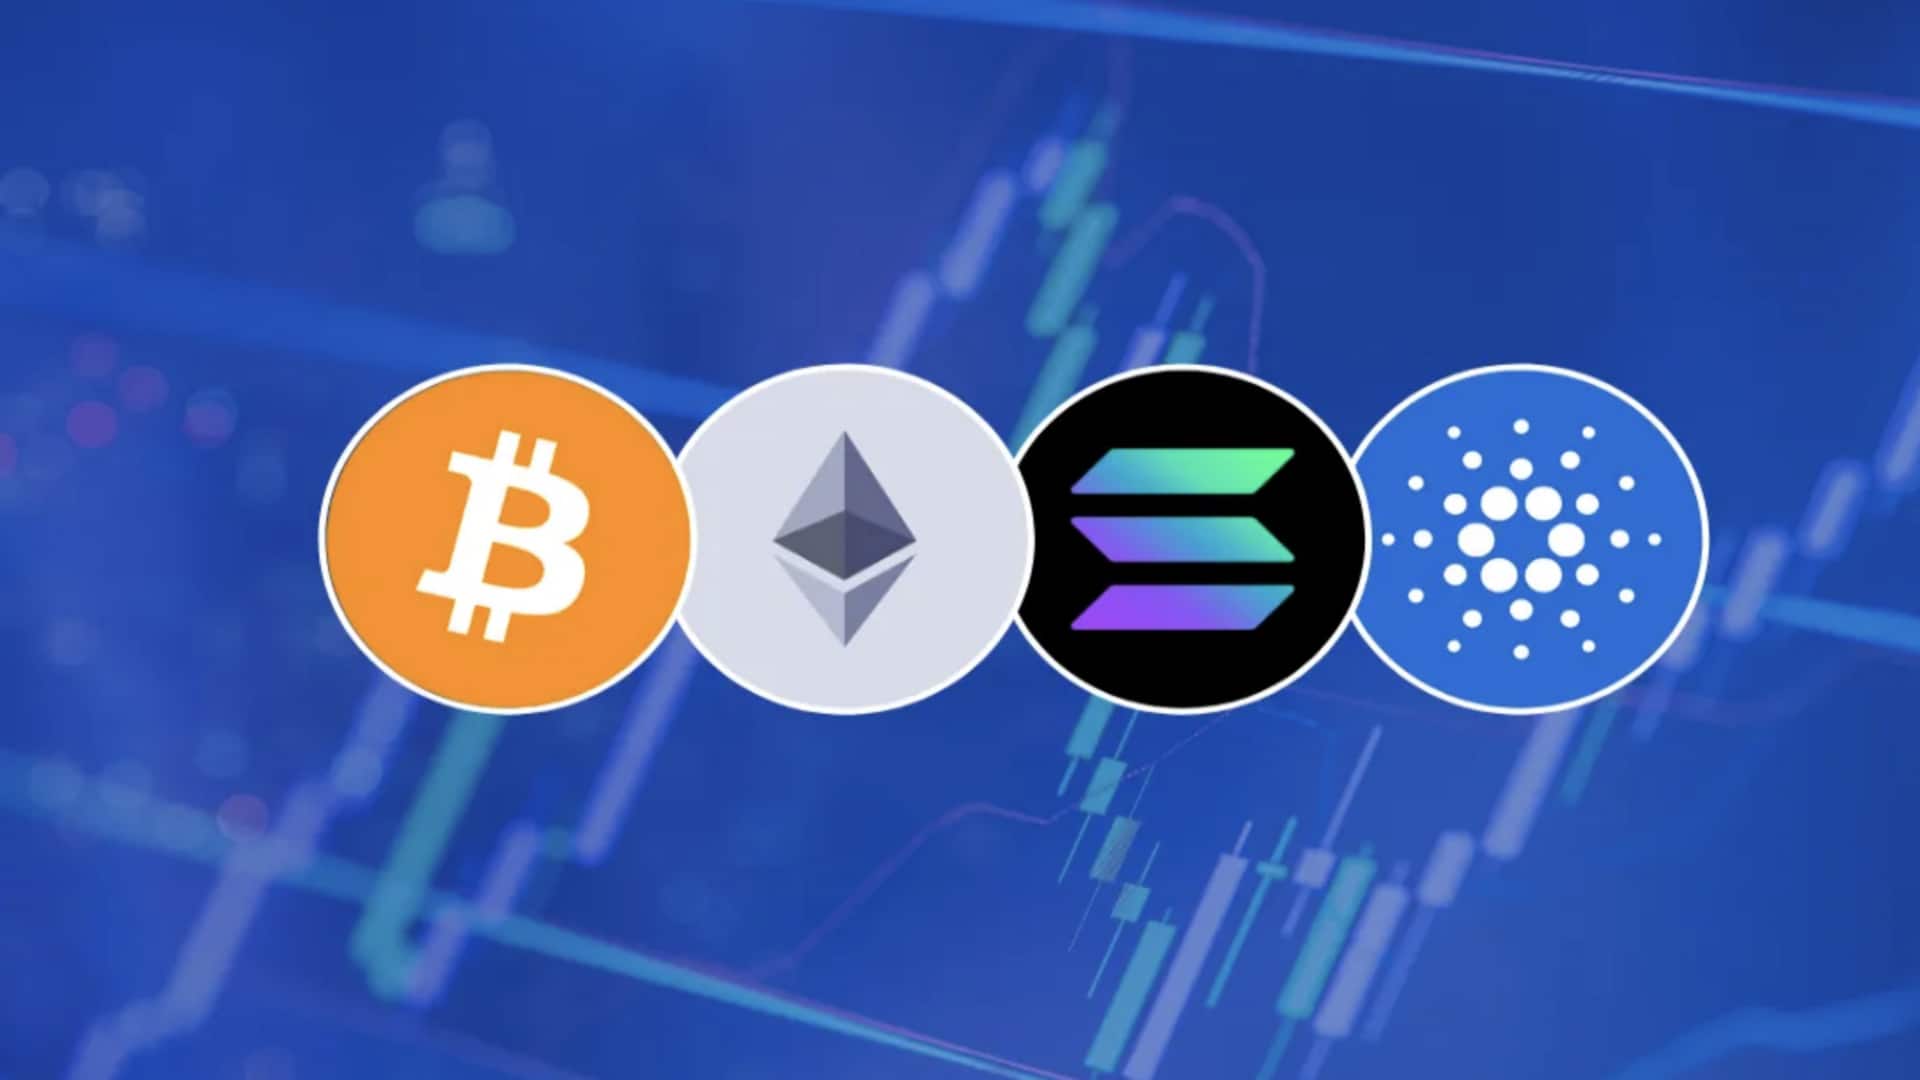 Today's cryptocurrency prices: Check rates of Bitcoin, Ethereum, Dogecoin, Solana